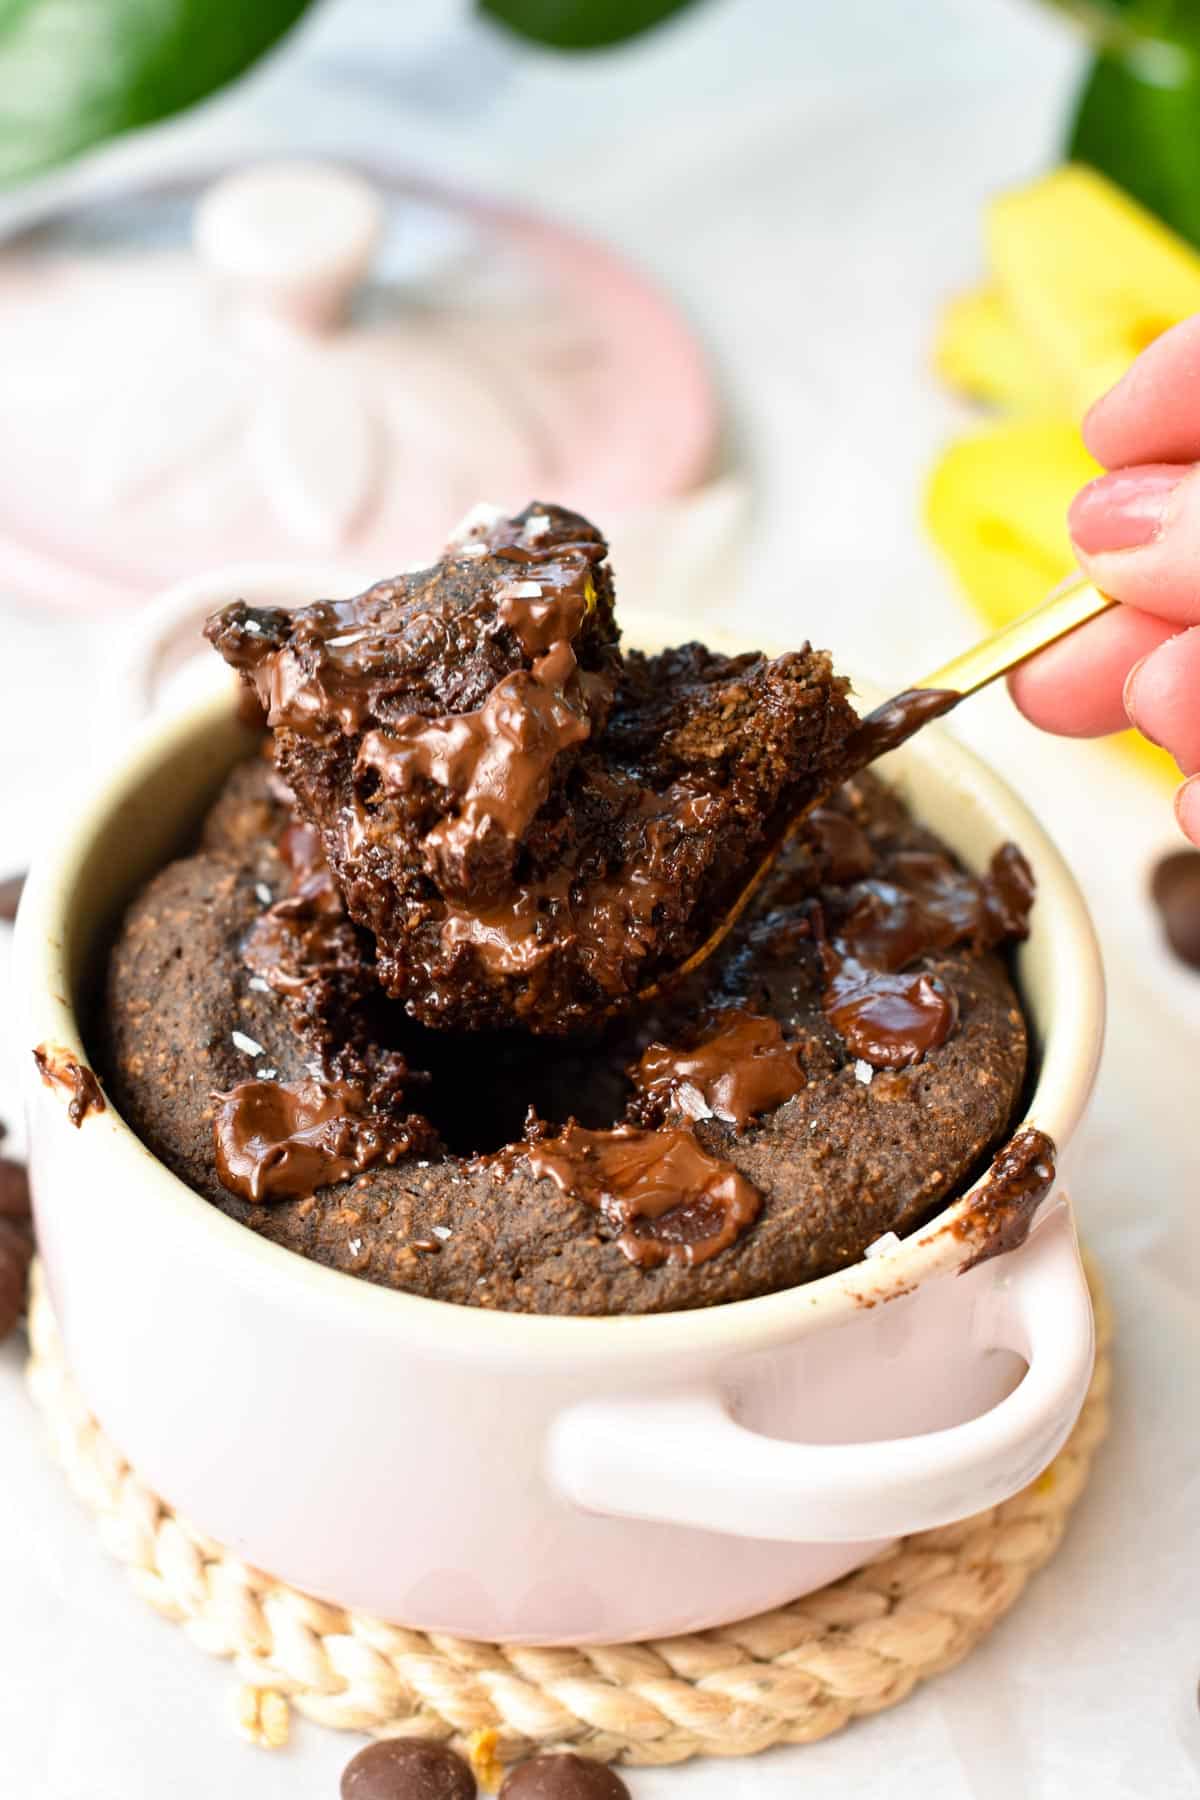 A spoon digging in a protein mug cake and showing the texture of the fudgy chocolate mug cake.